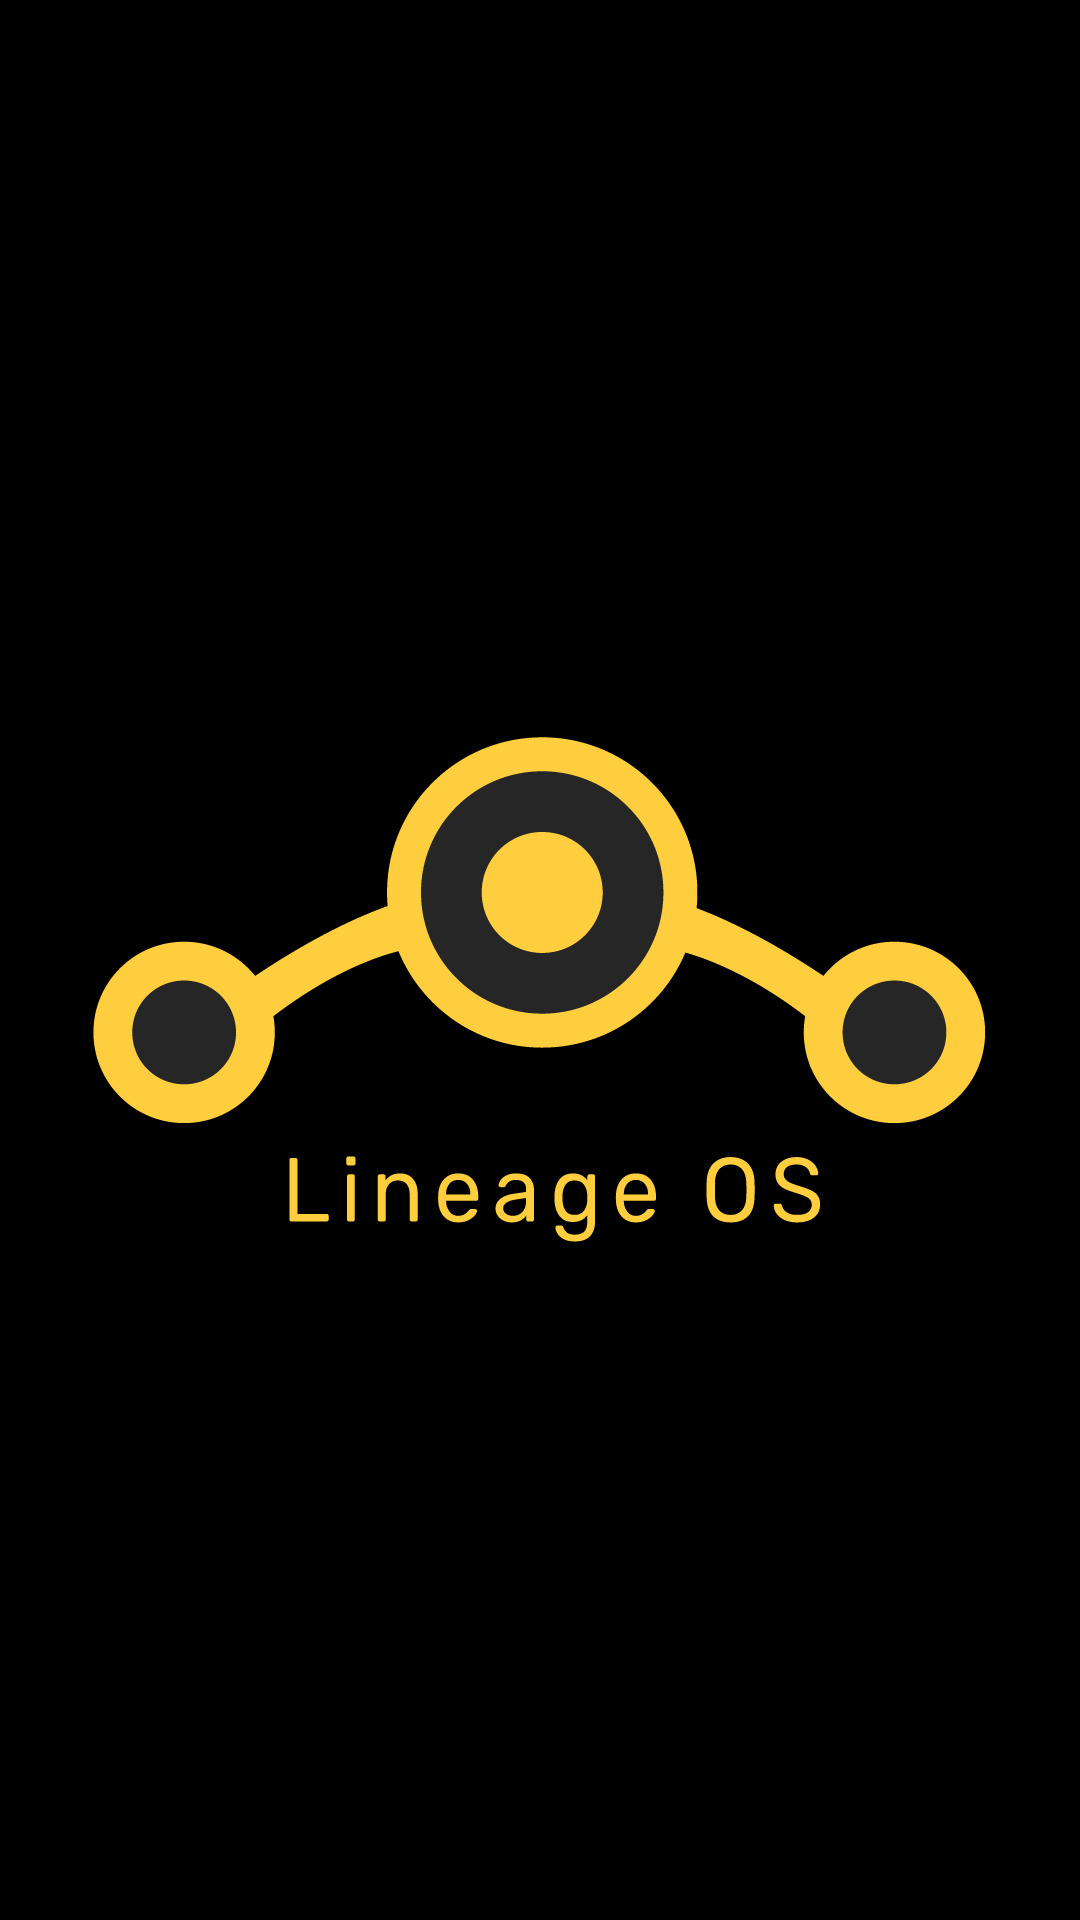 Lineage OS, Android (operating system), Simple background, Minimalism Wallpaper